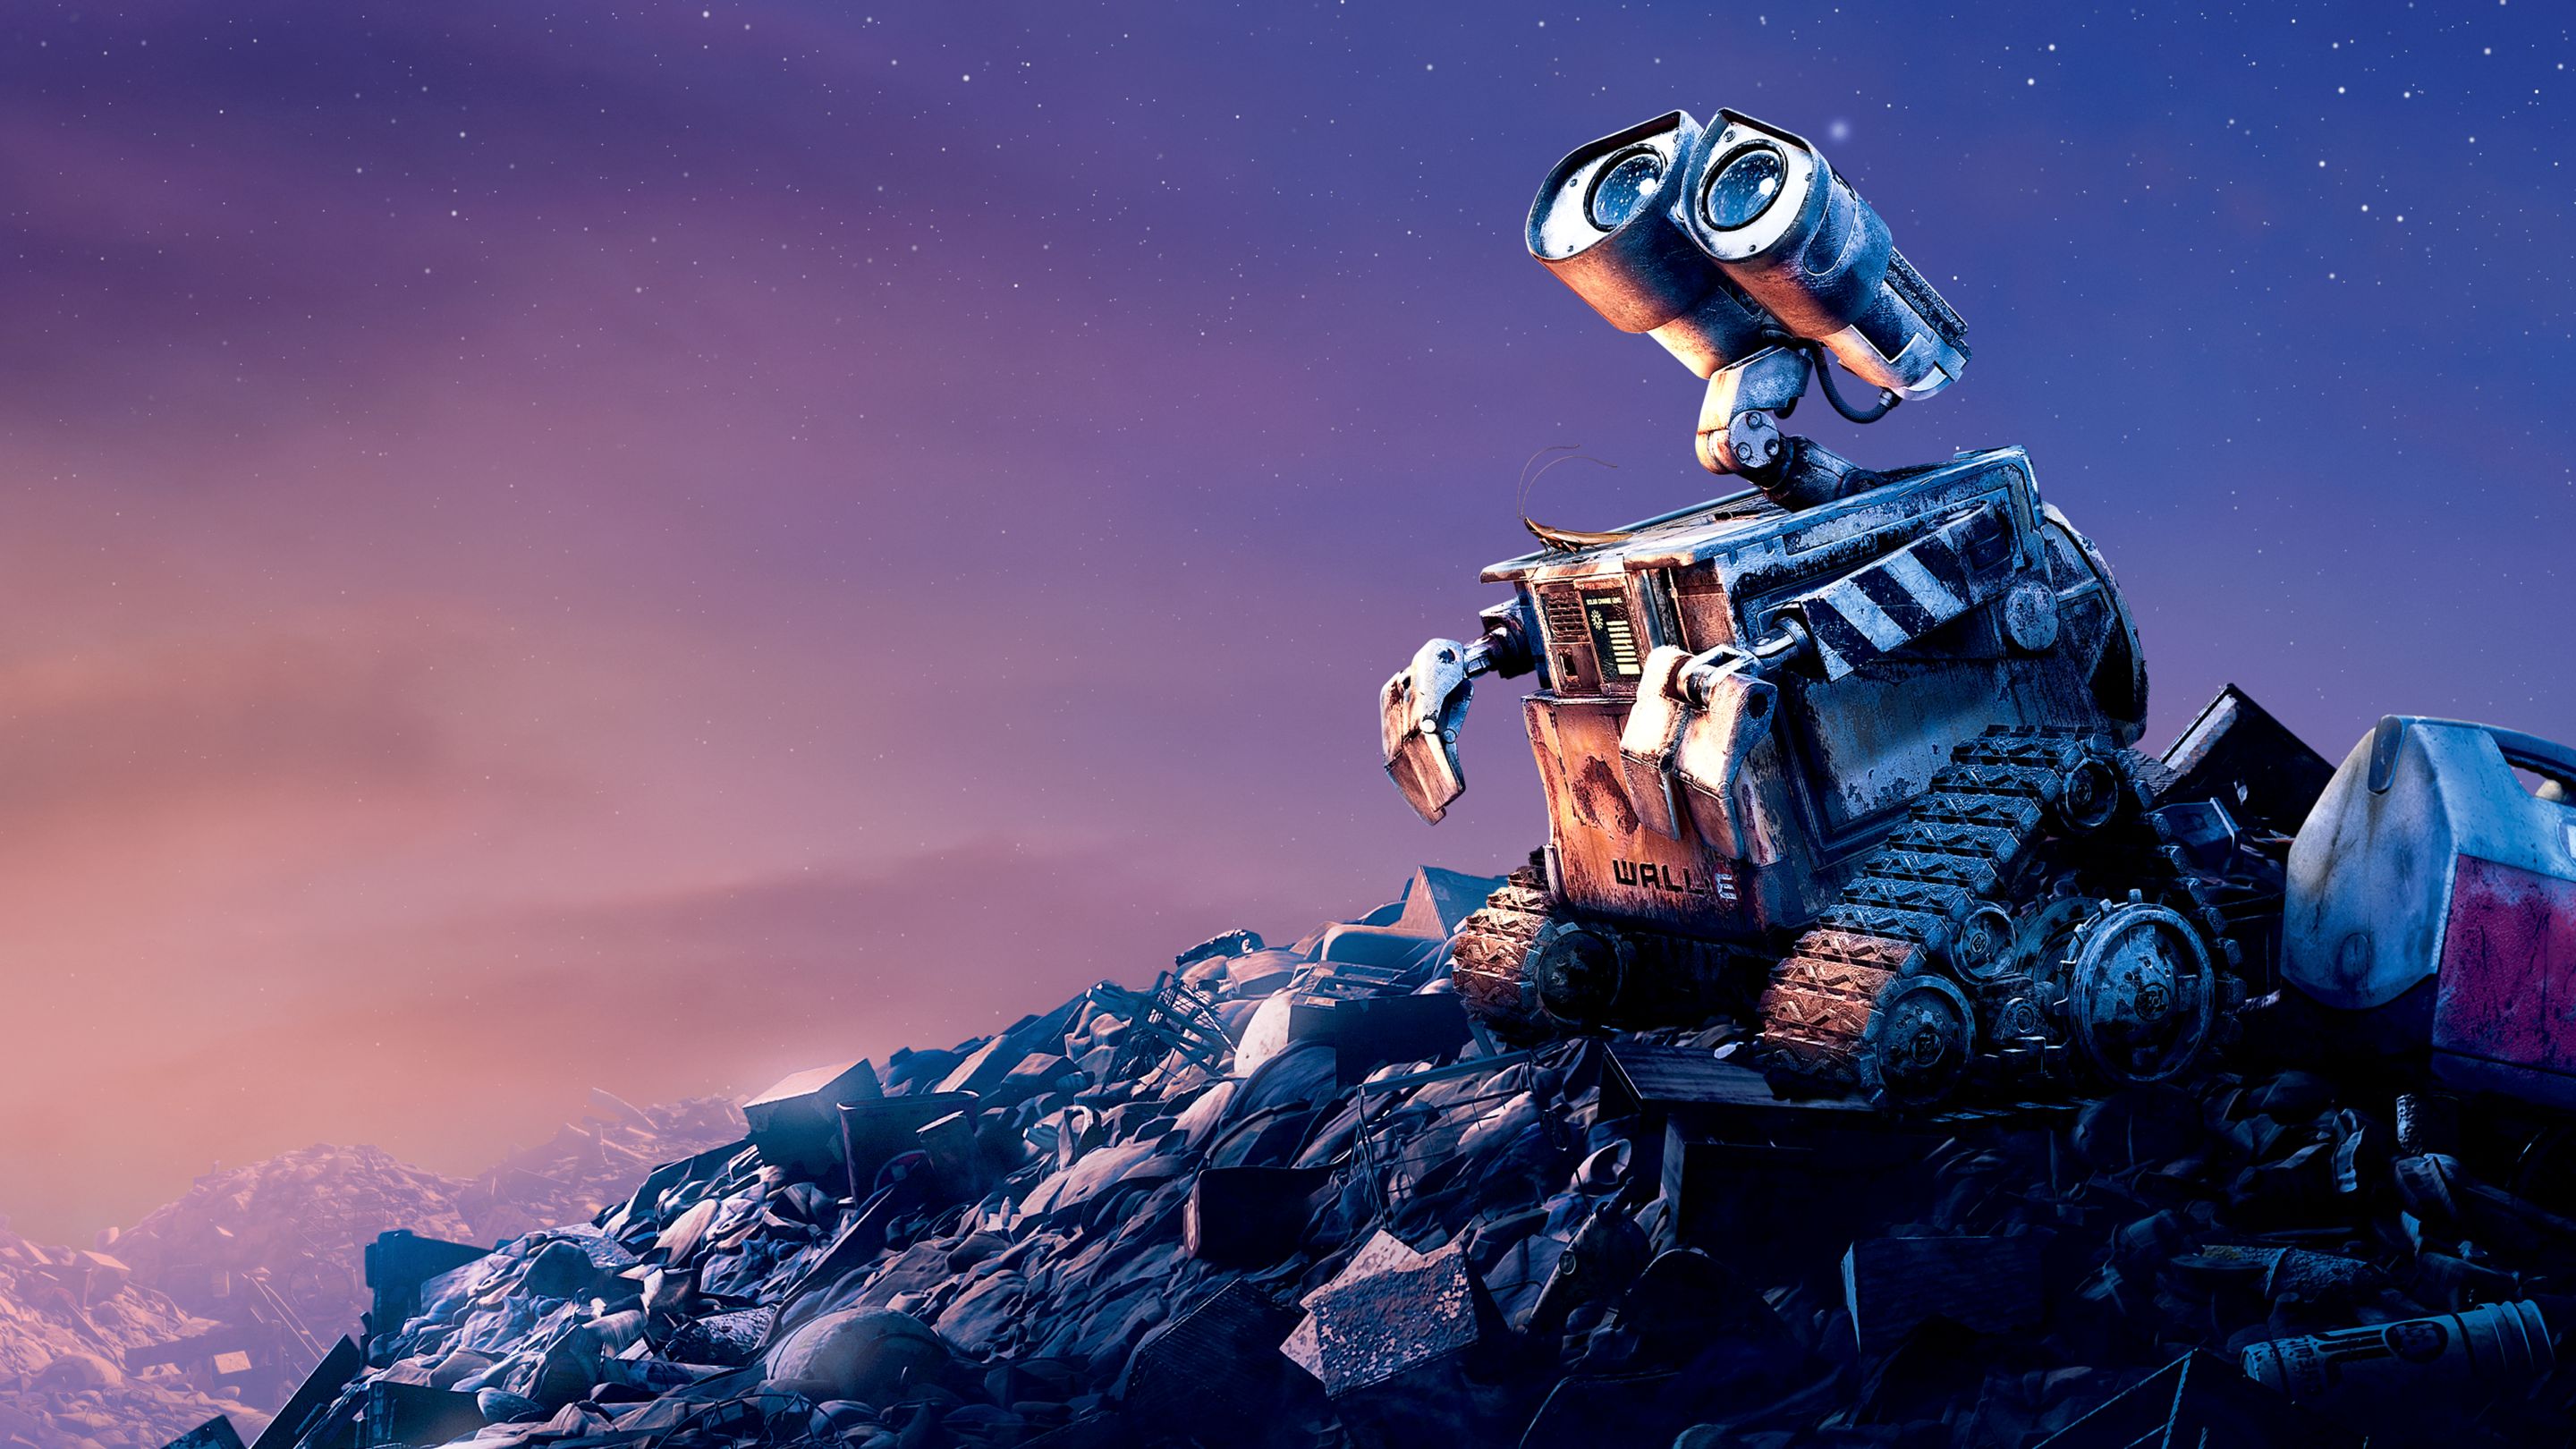 Why Wall E Perfectly Demonstrates The Beauty Of Life The Art Of Vibing